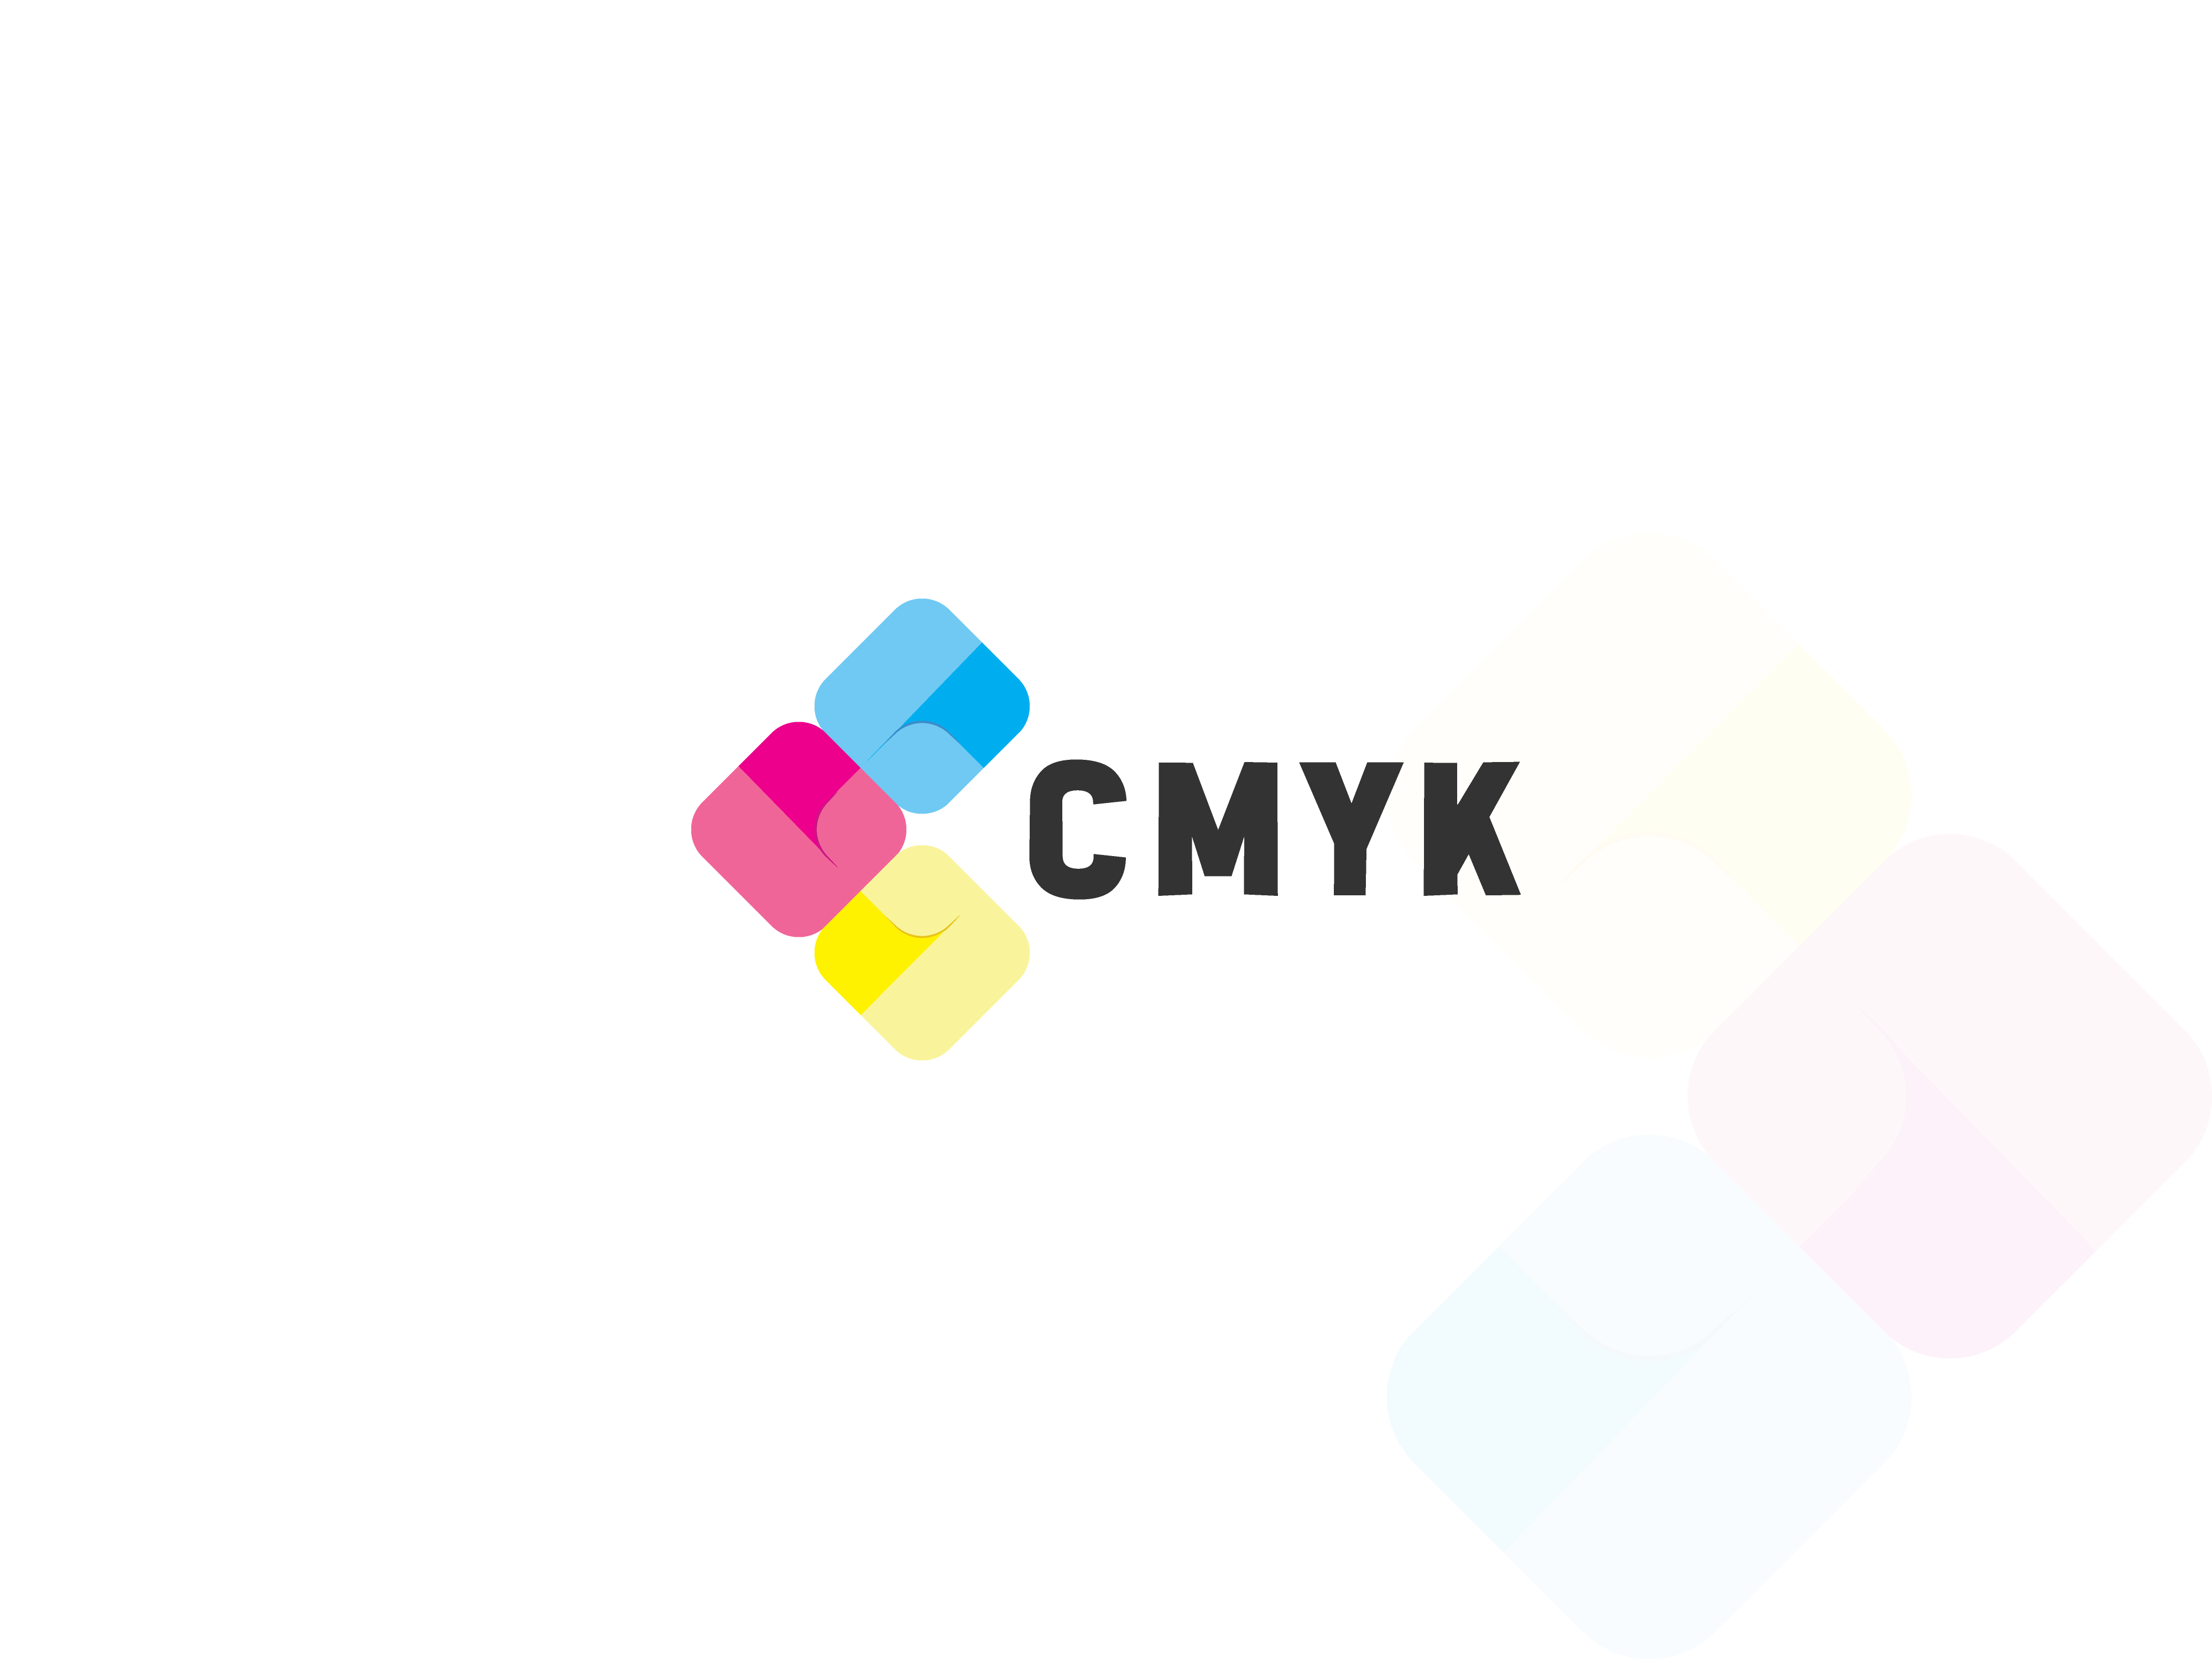 What are CMYK printing and Spot-color printing?